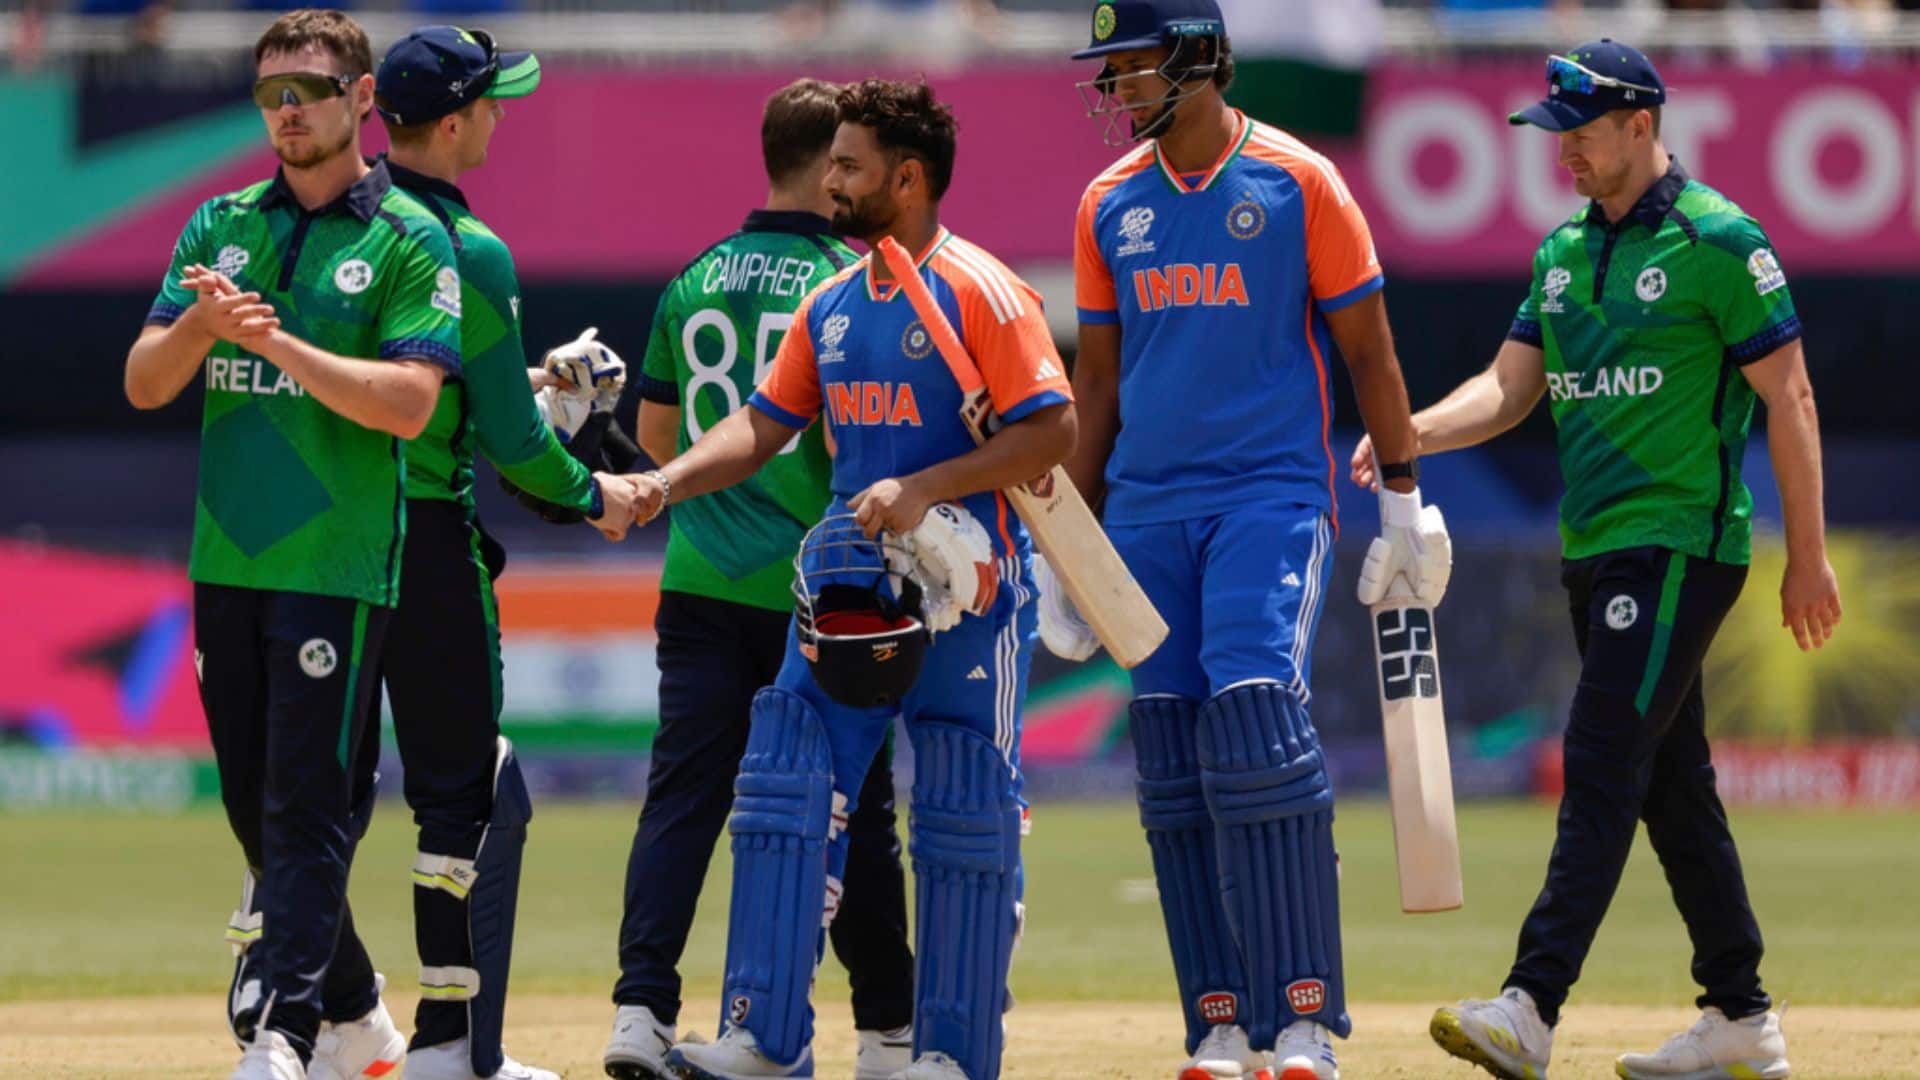 India defeated Ireland in their last game [AP]